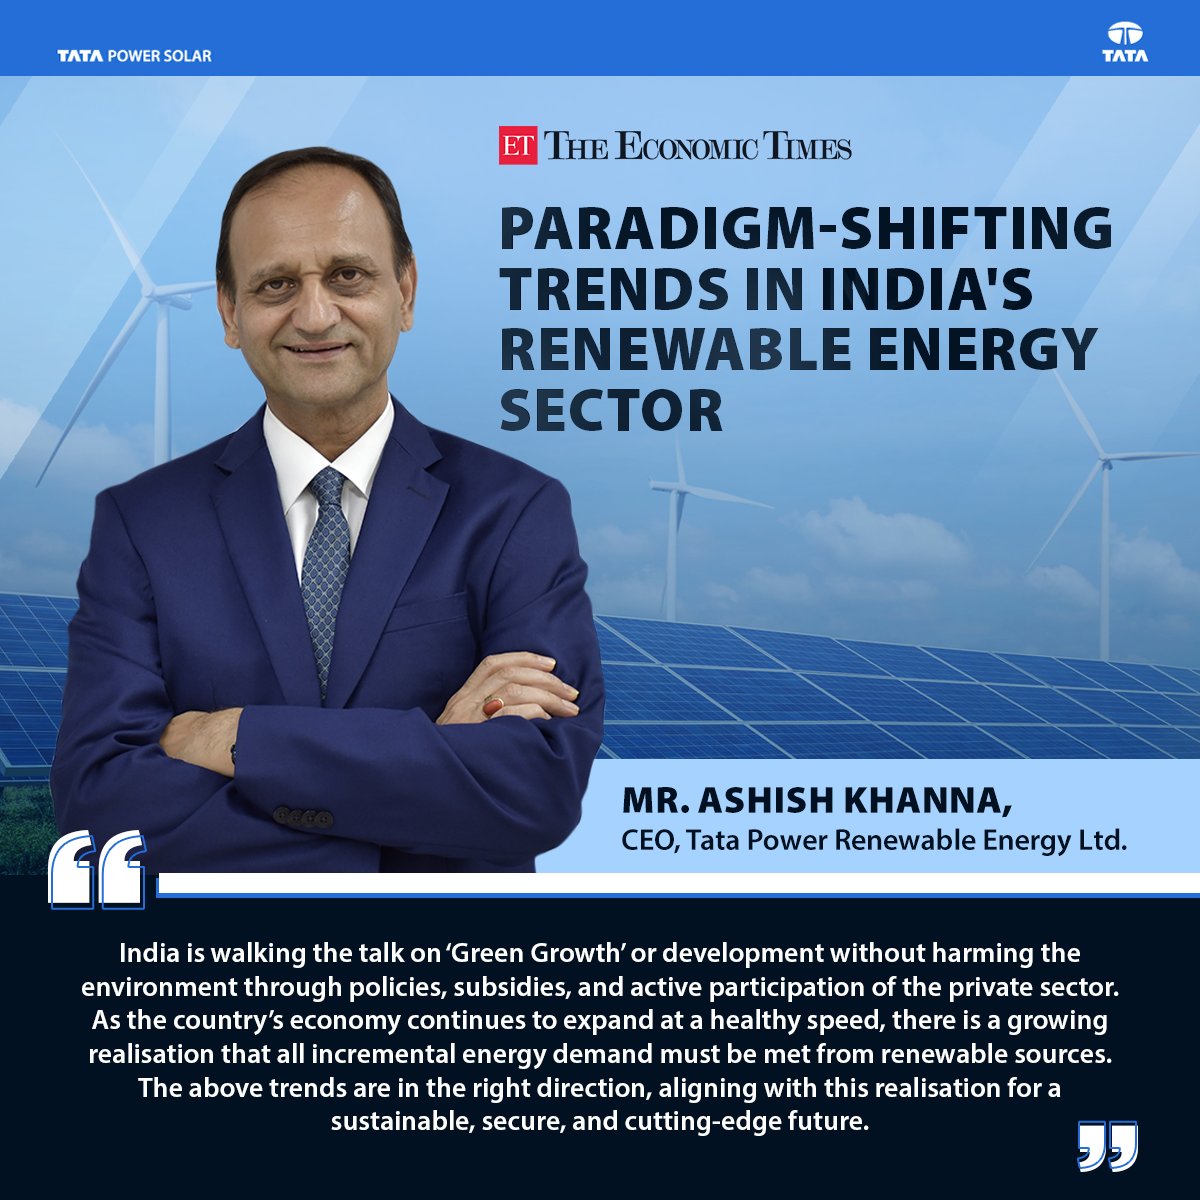 Mr. Ashish Khanna, CEO, Tata Power Renewable Energy Ltd., shares insights on India's renewable energy trends and highlights the country's commitment to sustainable, cutting-edge growth in an article by @ETEnergyWorld.

Read it here: bit.ly/3PxO0X6